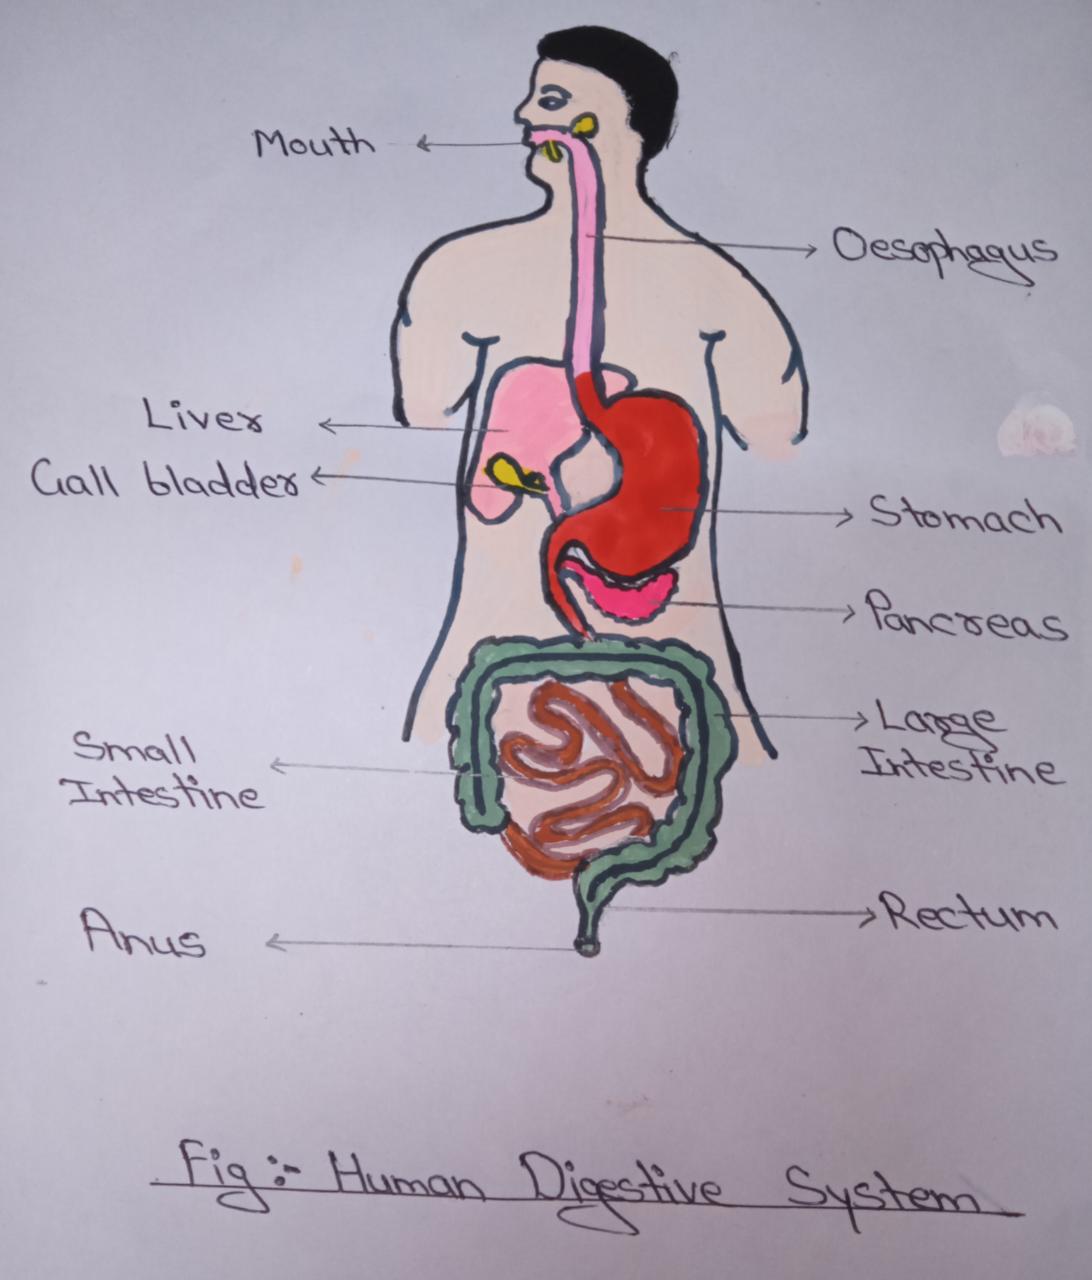 Human-Digestive-System-and-All-Parts.jpg